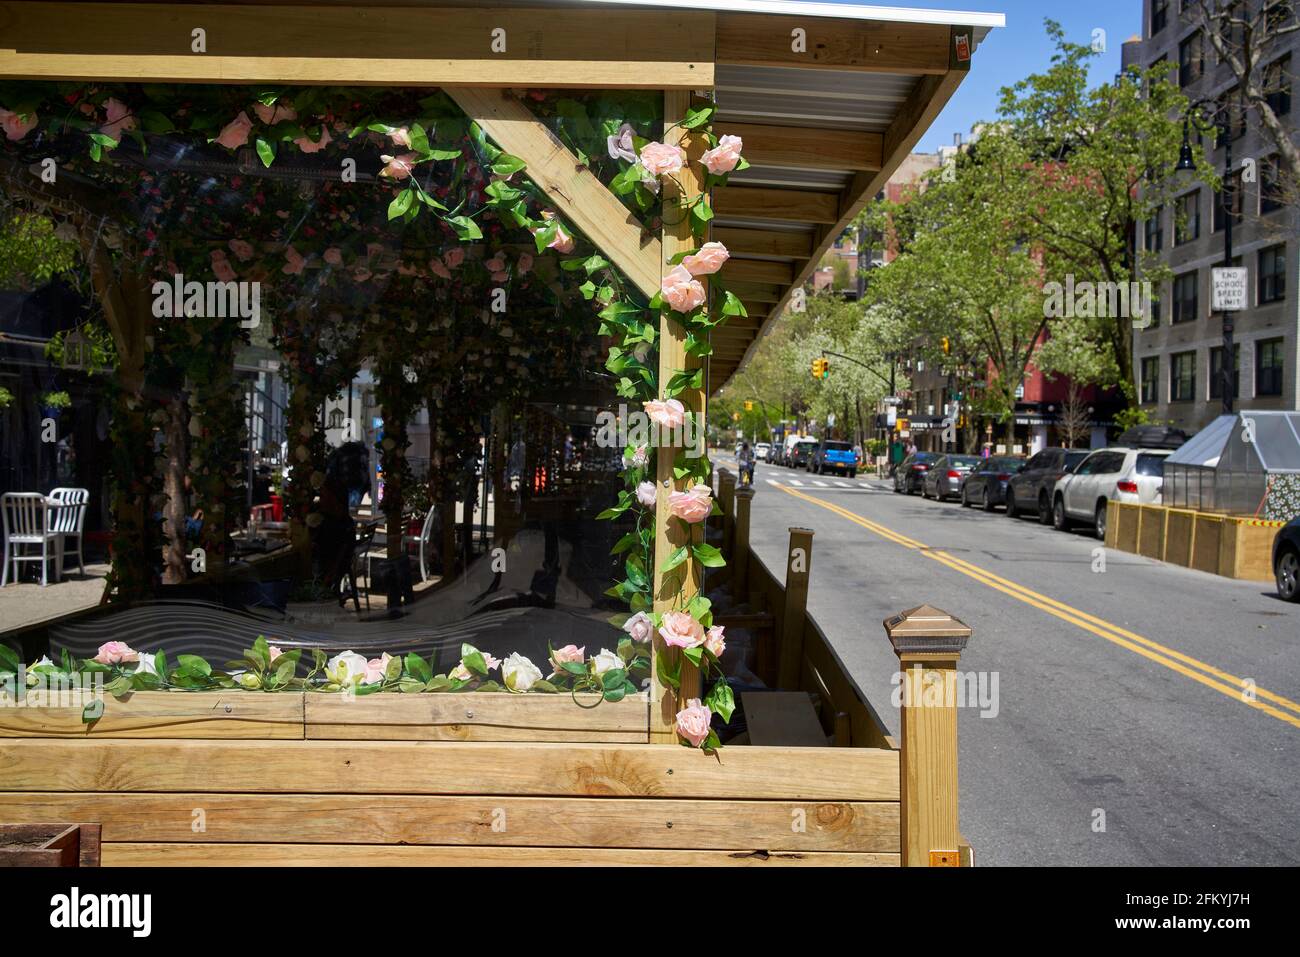 Temporary, COVID-19 regulated outdoor sidewalk cafe and restaurant decorated with flowers in New York City. Stock Photo